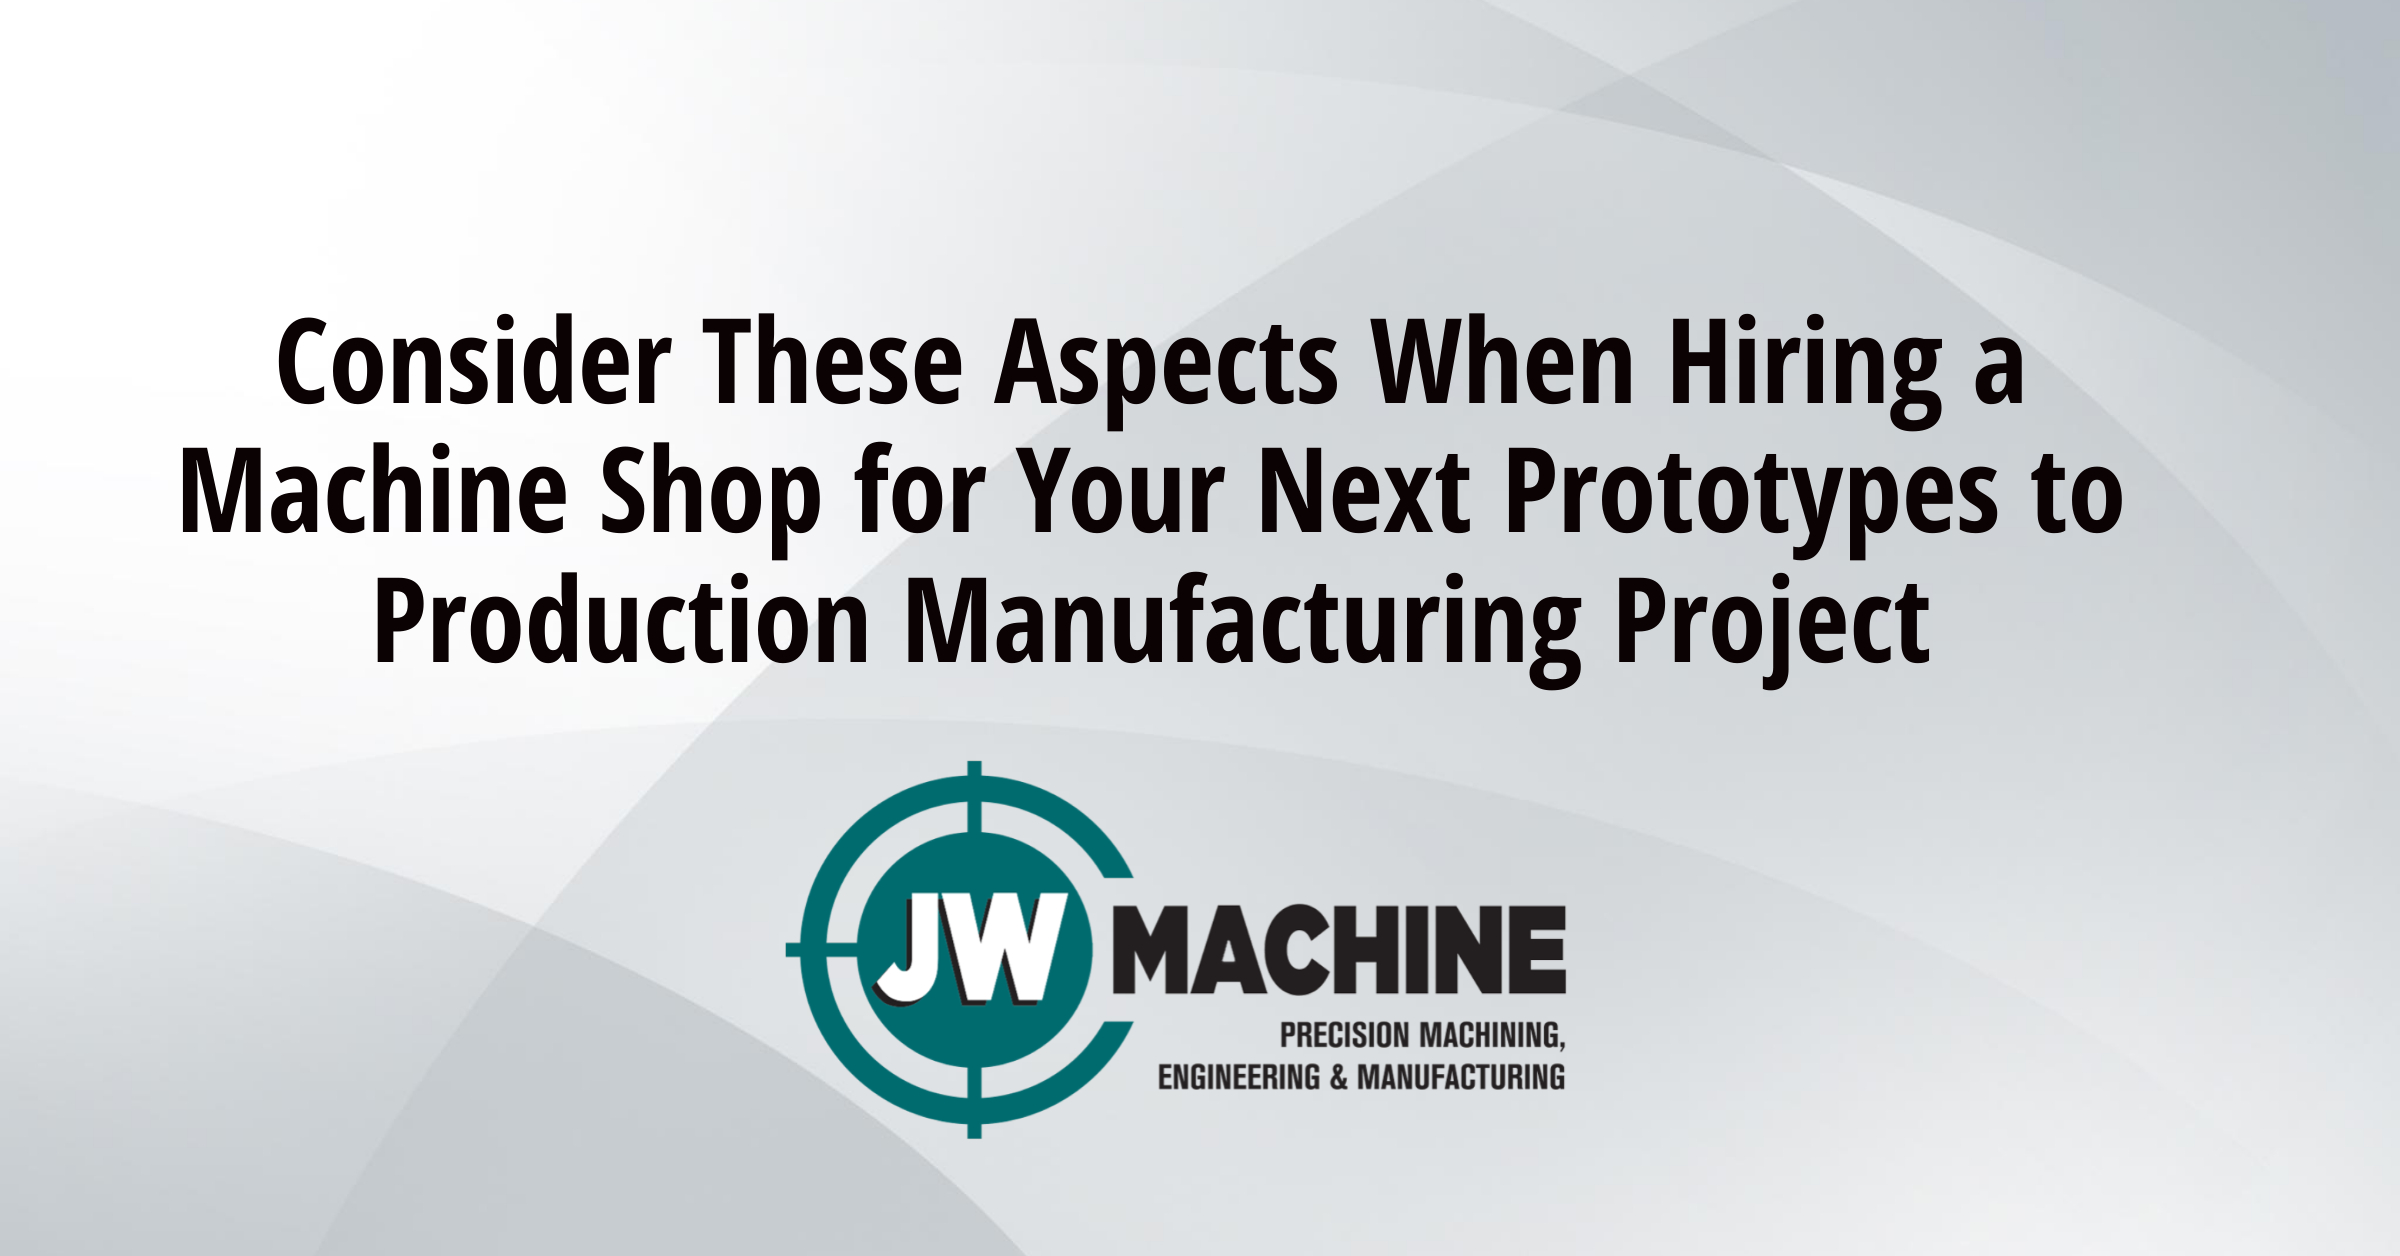 Prototypes to Production Manufacturing Project